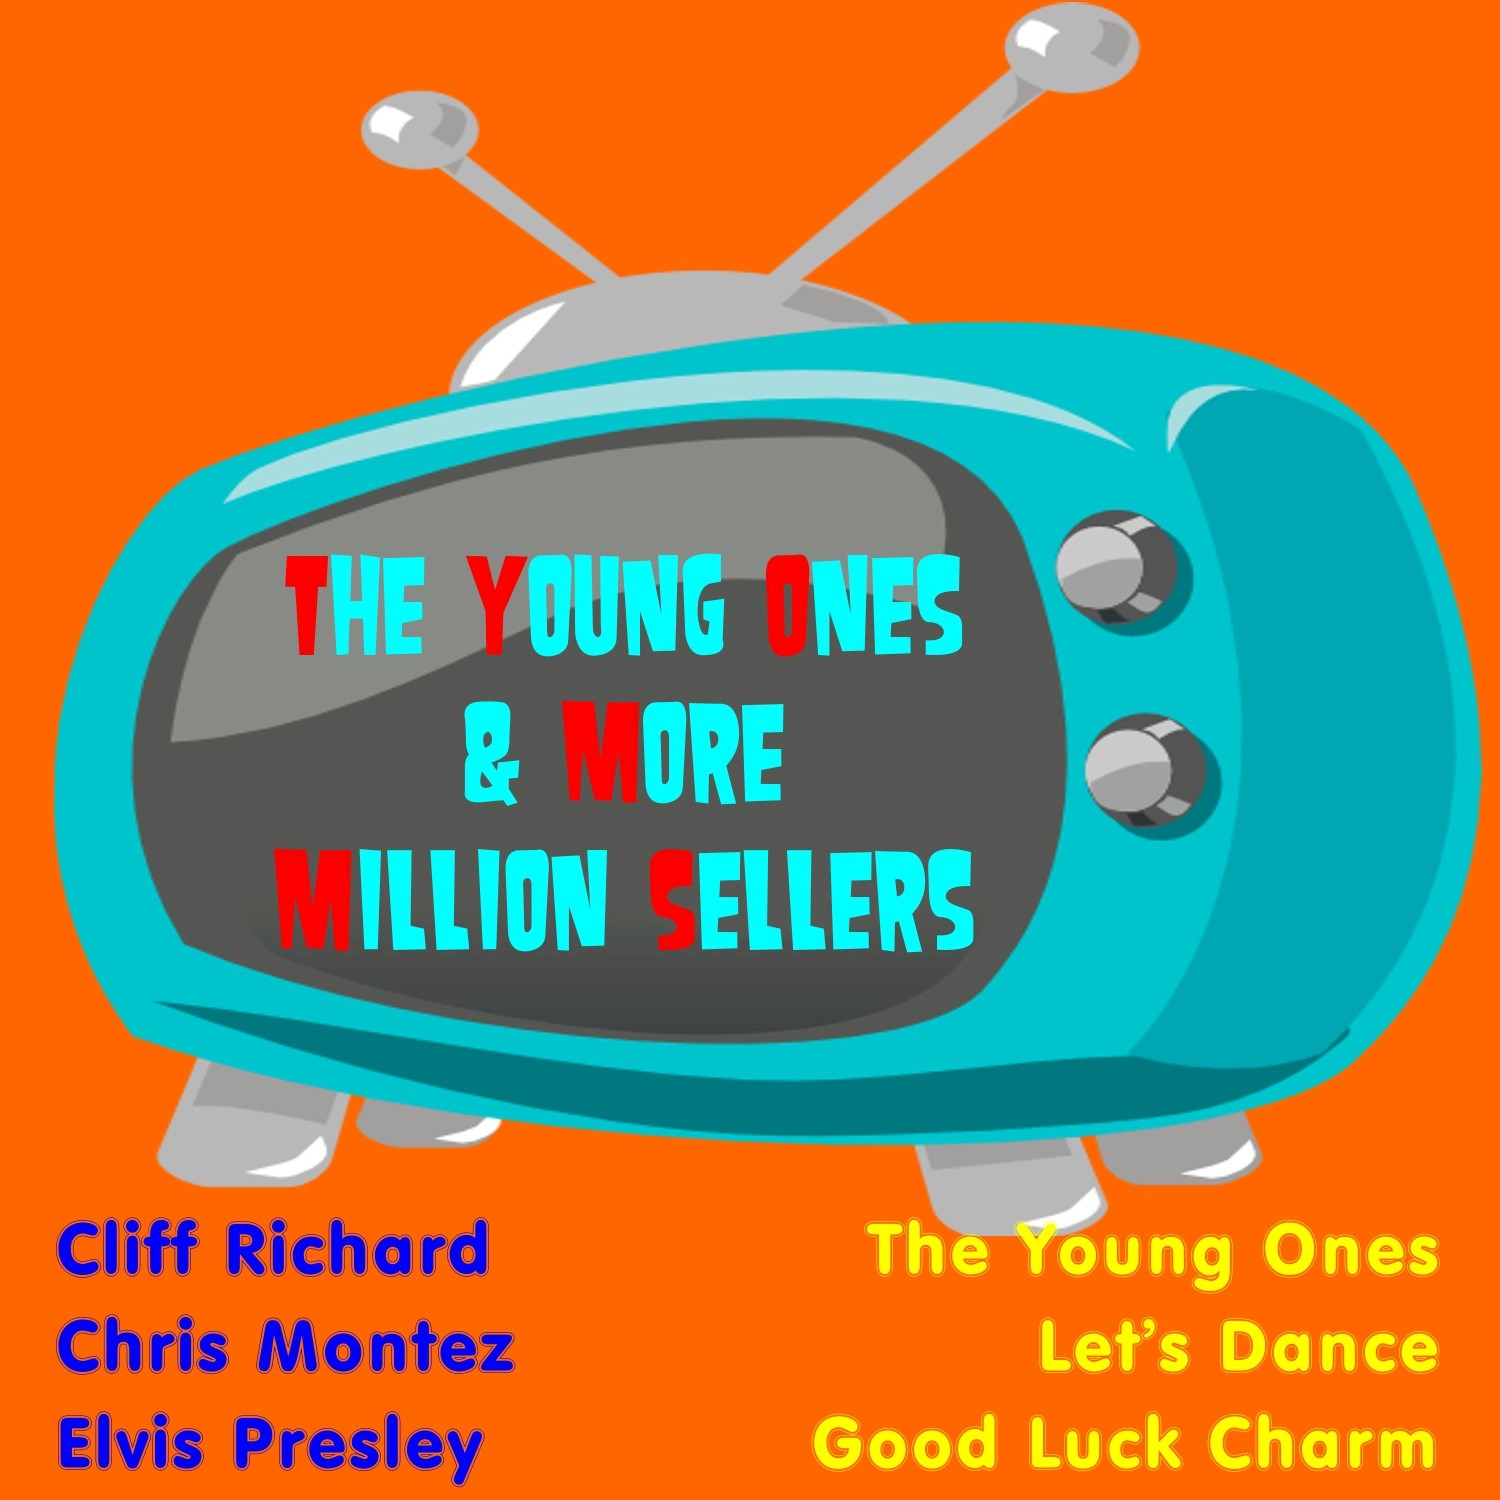 The Young Ones & More Million Sellers